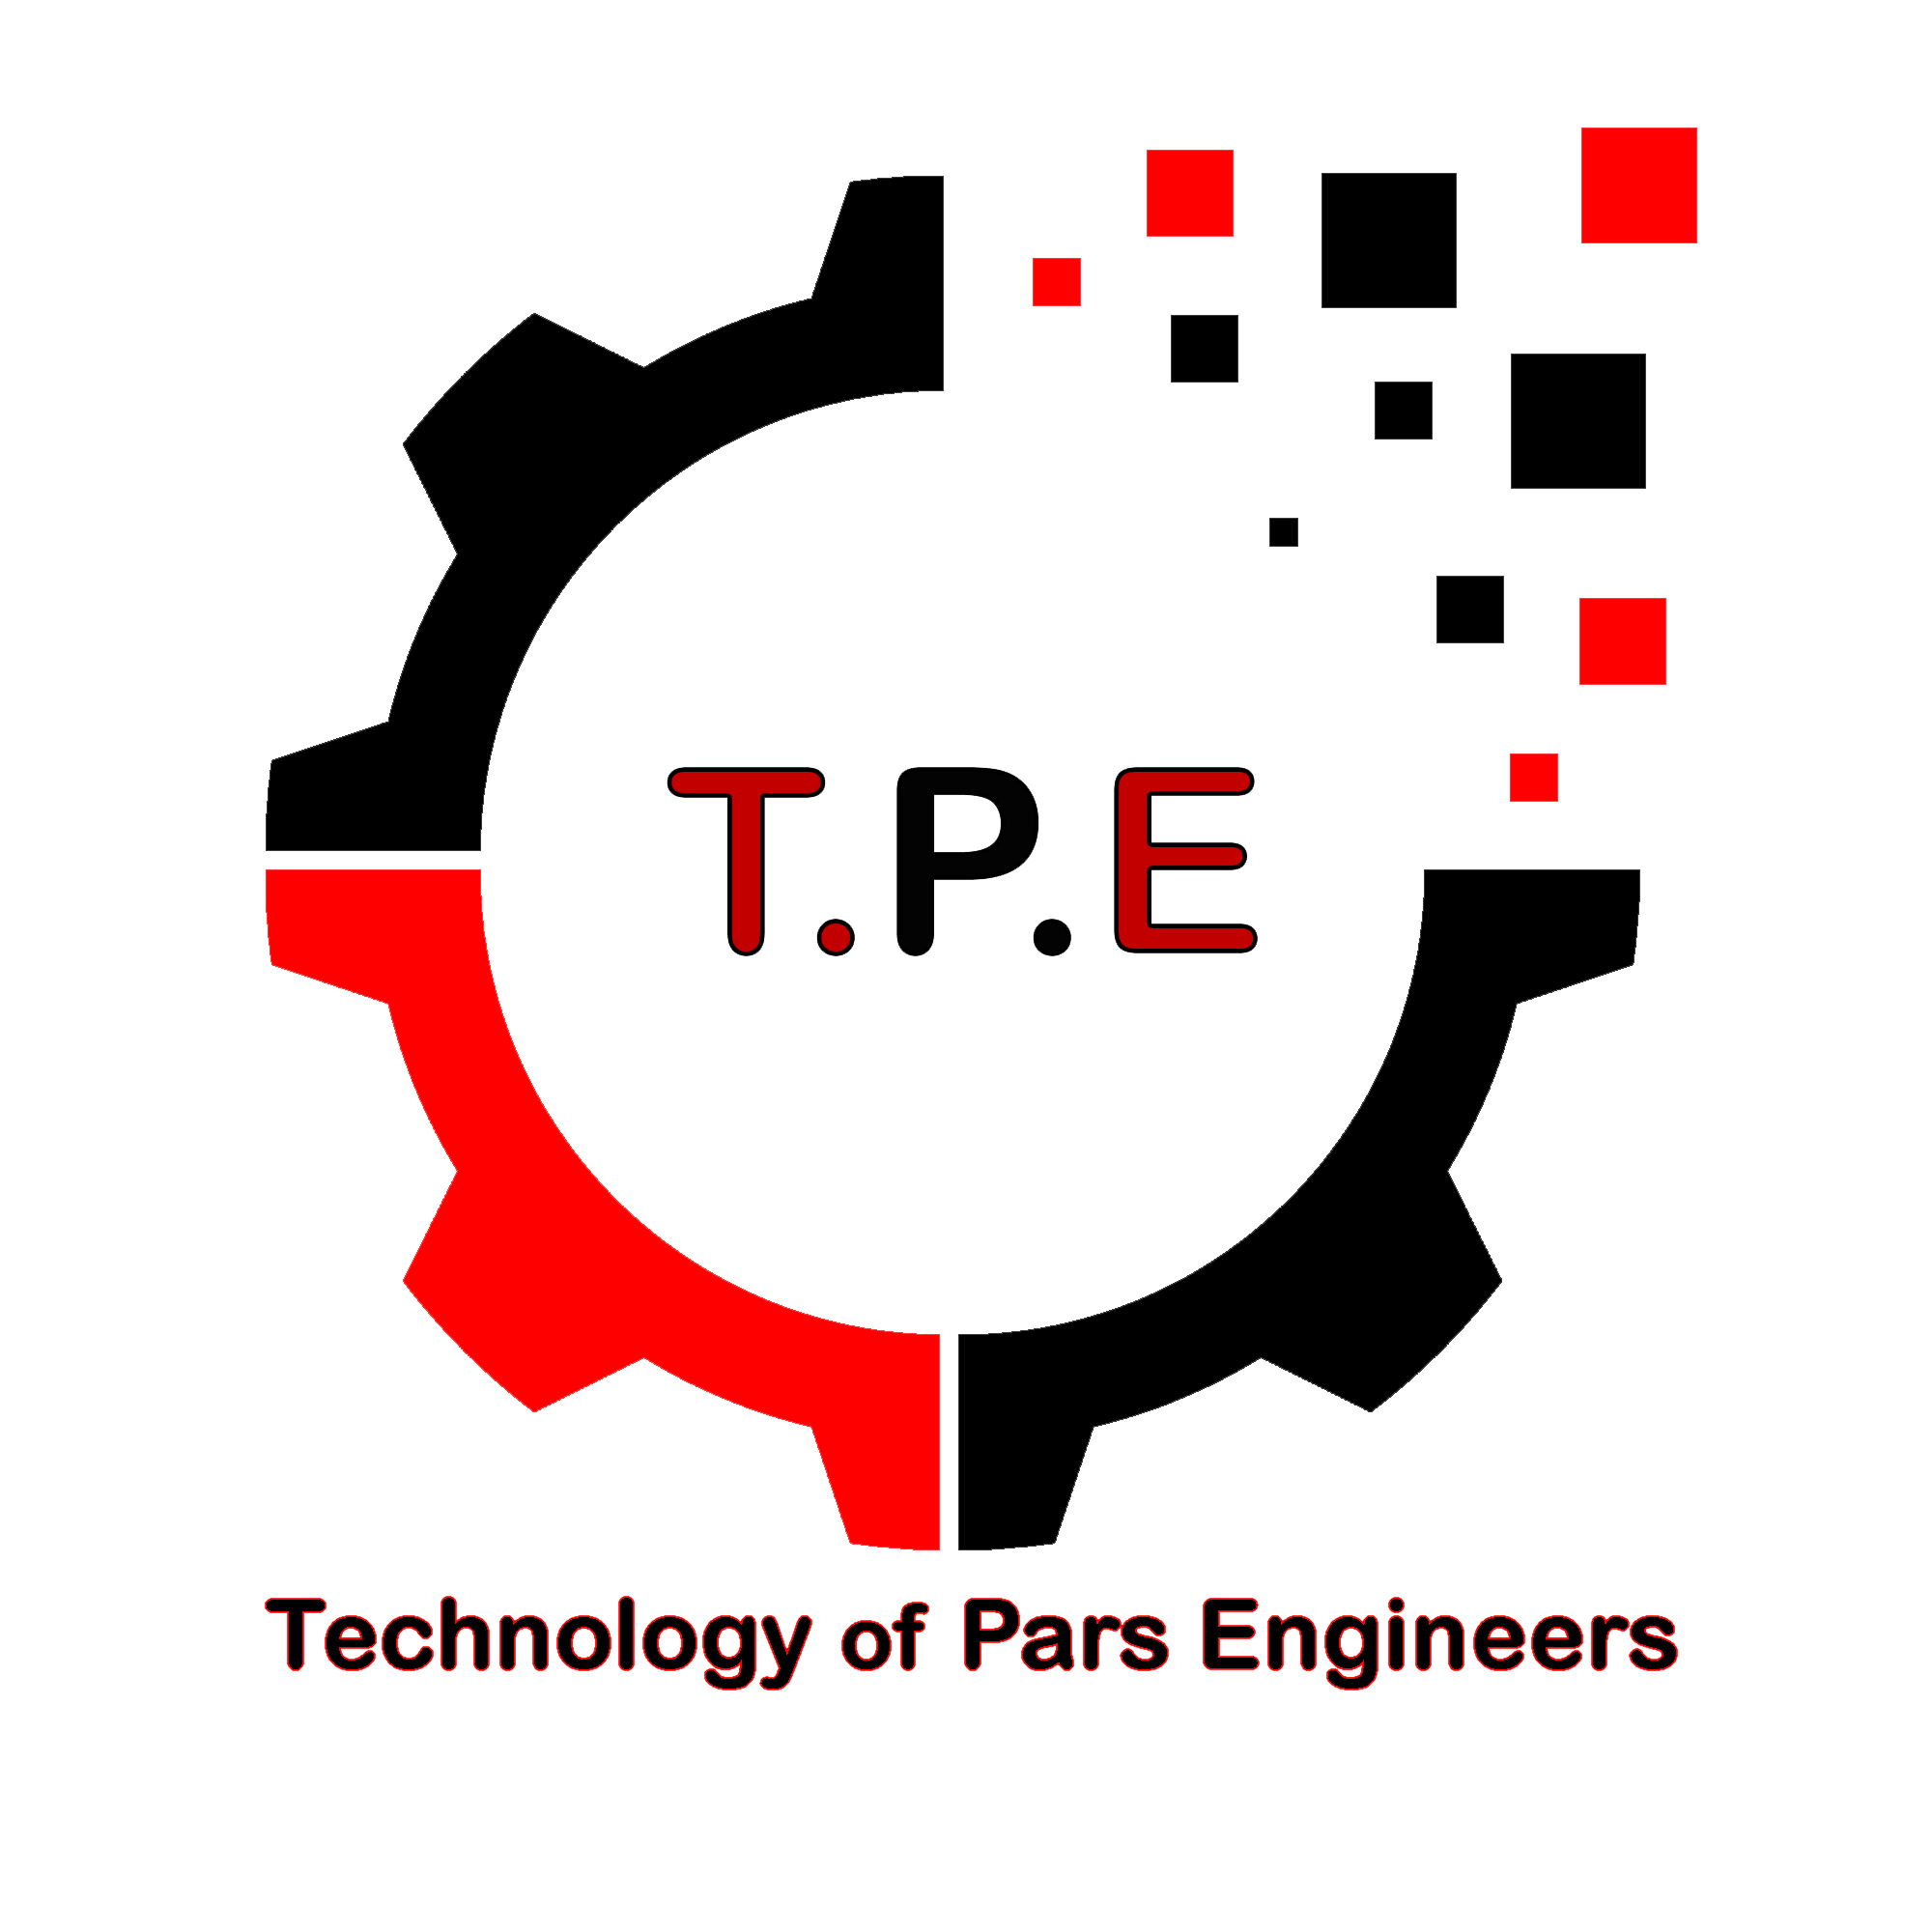 TECHNOLOGY OF PARS ENGINEERS (TPE)